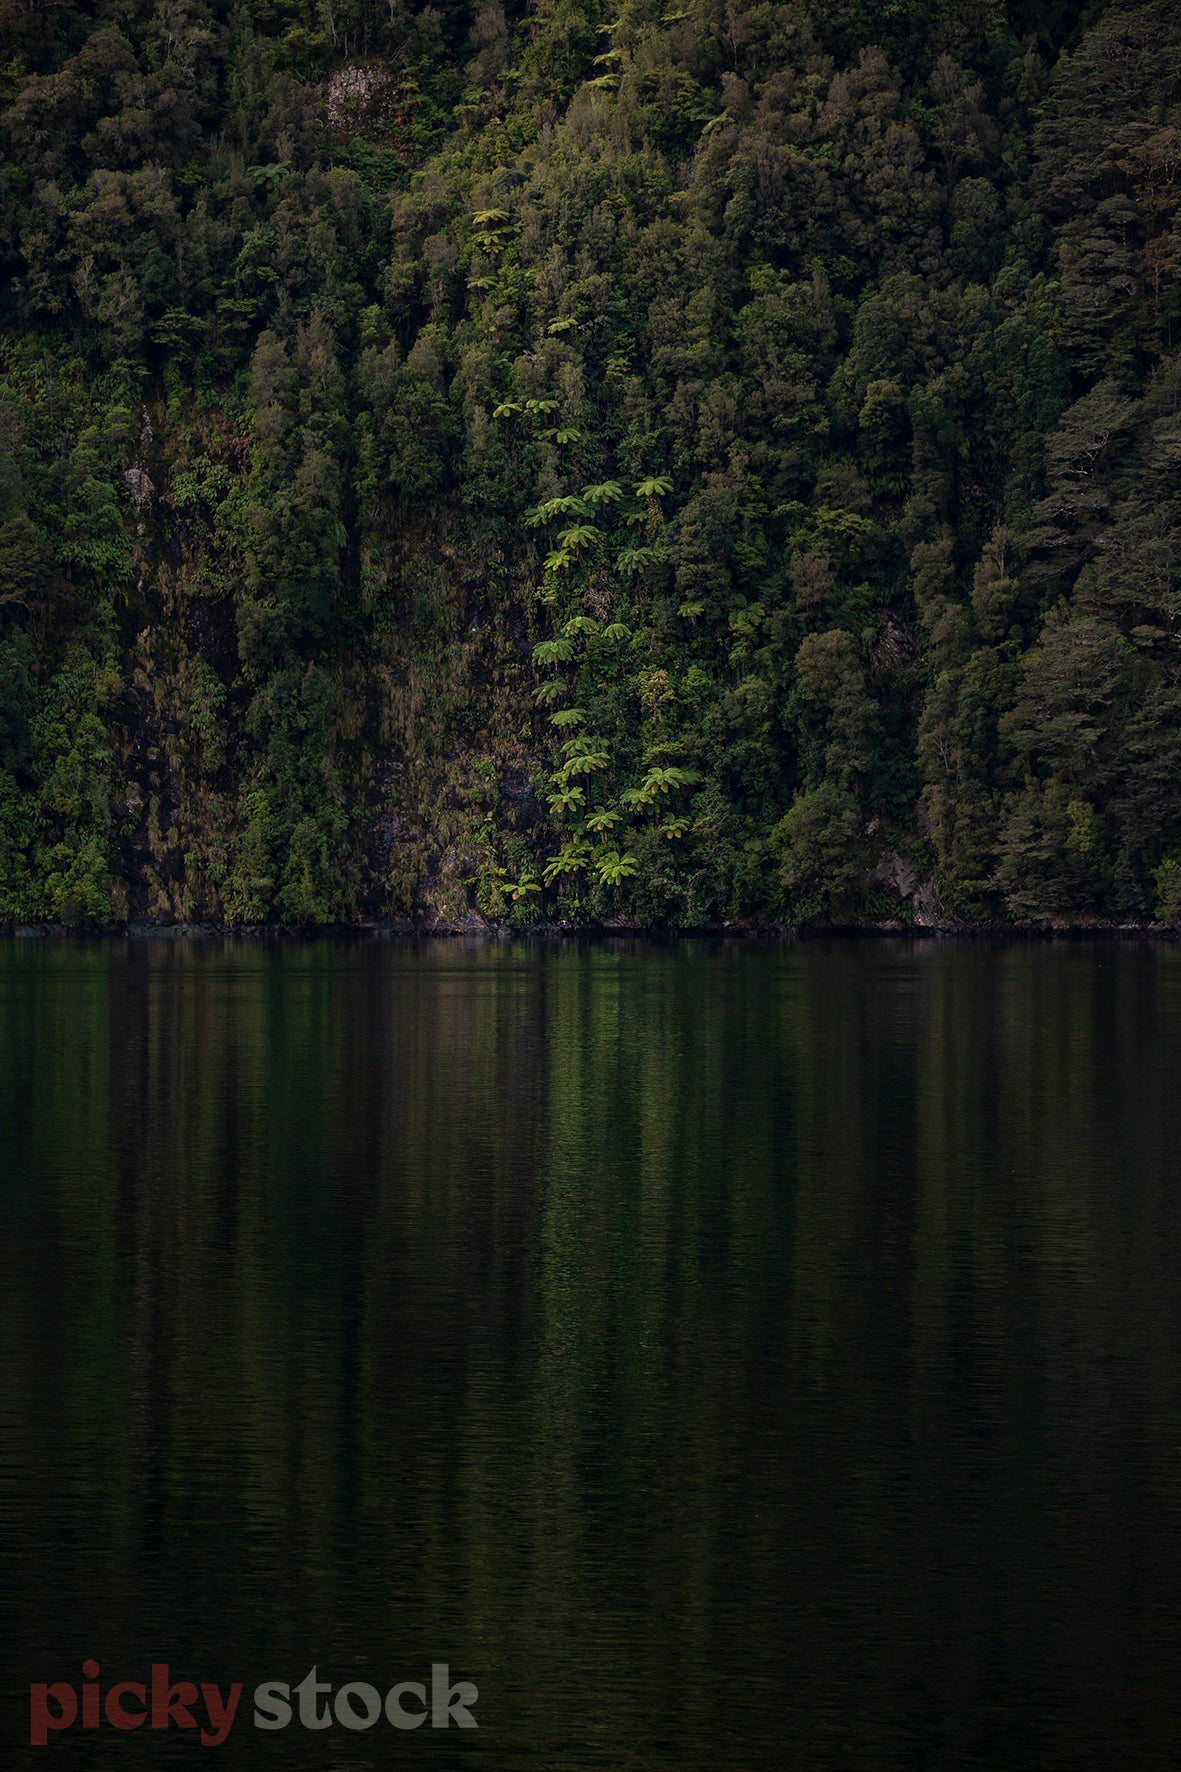 Large cliff face covered in bush portrait image with dark water. Tree ferns reflected in still waters. 